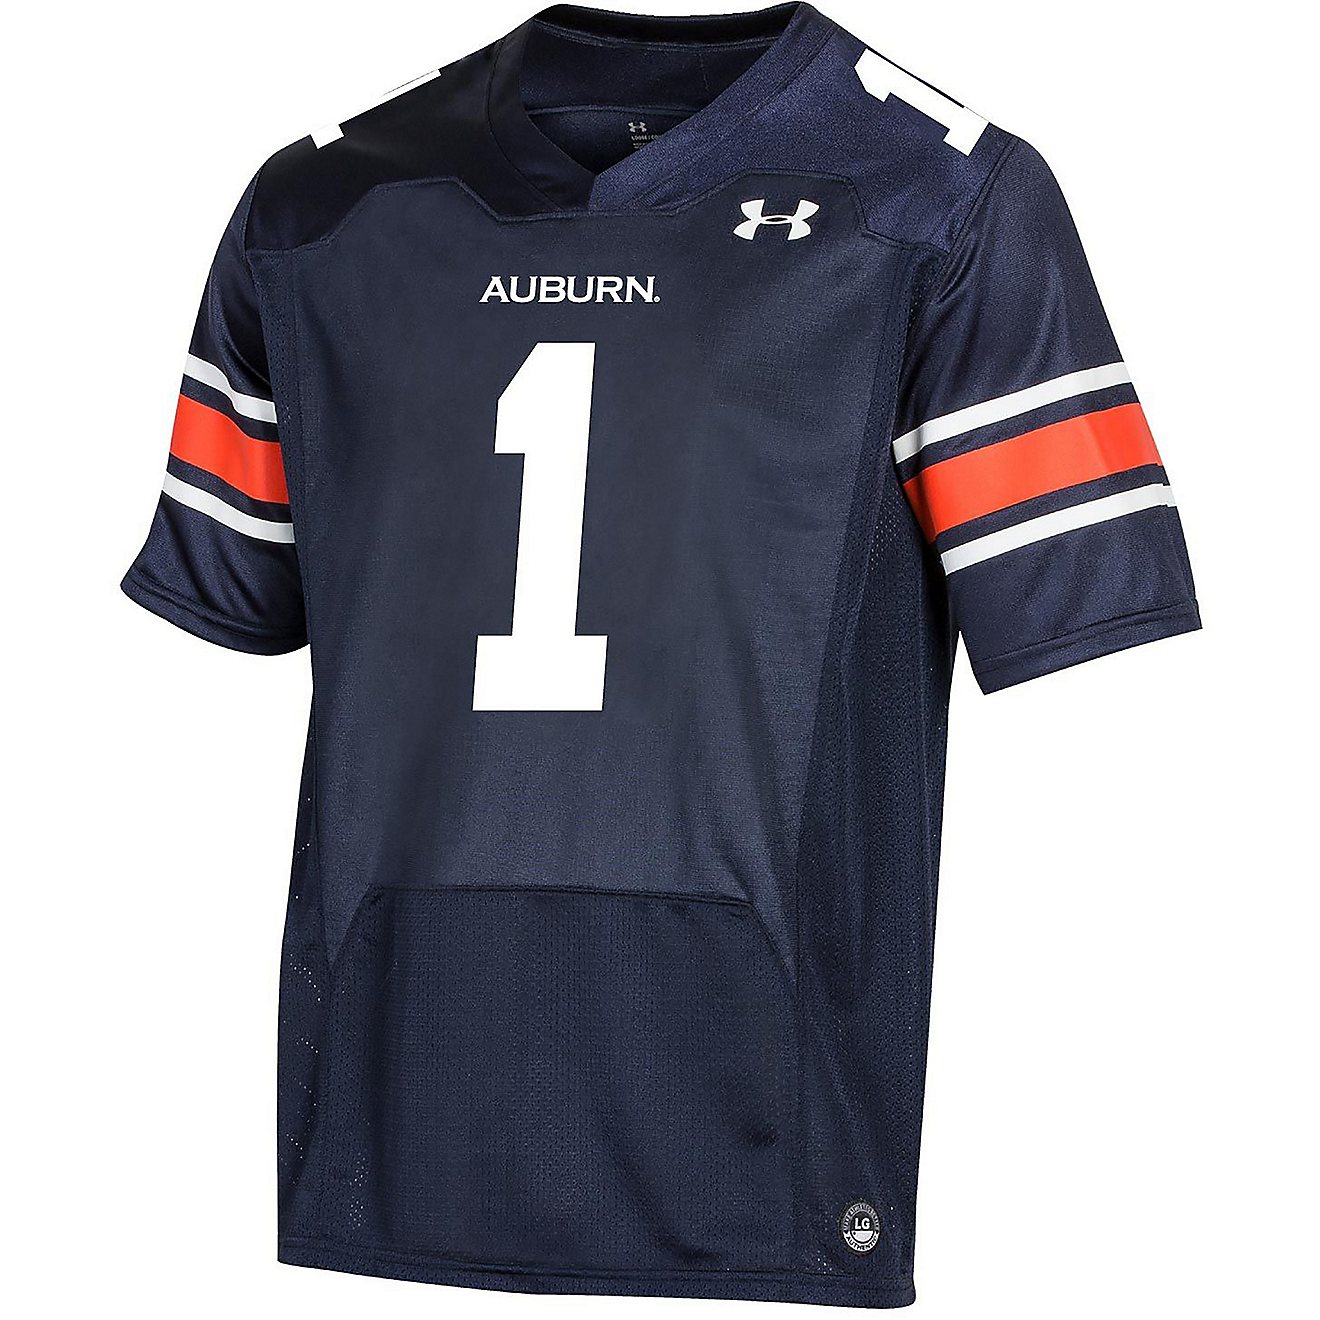 Under Armour Youth Auburn University Replica Football Jersey                                                                     - view number 1